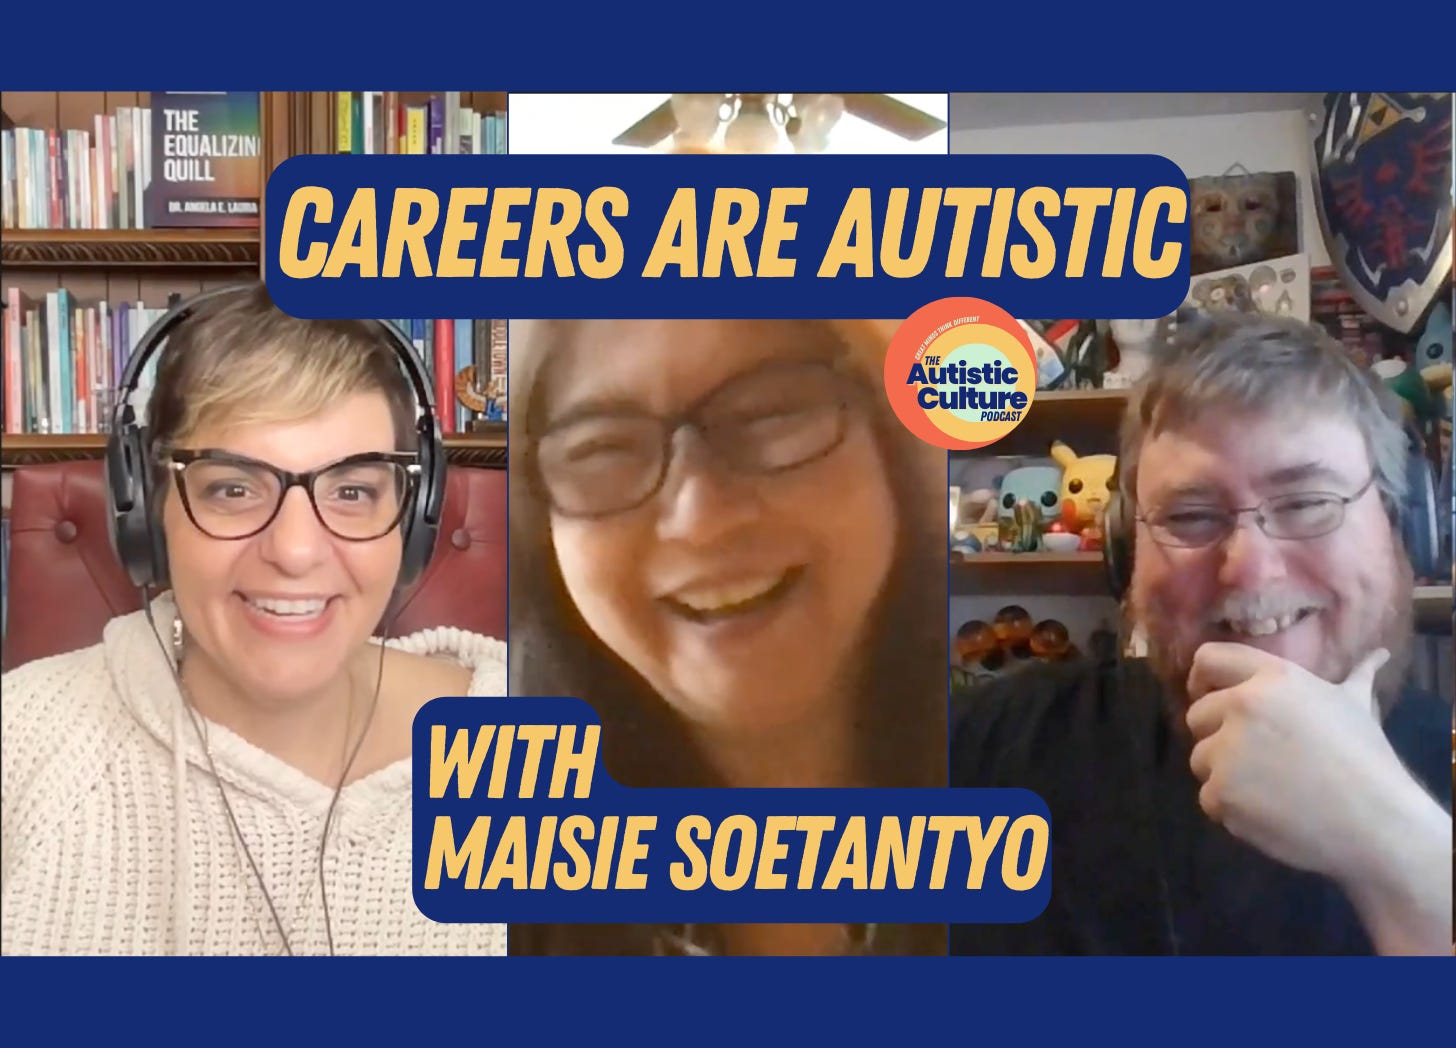 Listen to Autistic podcast hosts discuss: Careers are Autistic. Autism podcast | Interview with fellow Autistic Maisie Soetantyo from Career Pathways. They talk about how Autistics can build careers that play to Autistic strengths and support Autistic needs and interests.